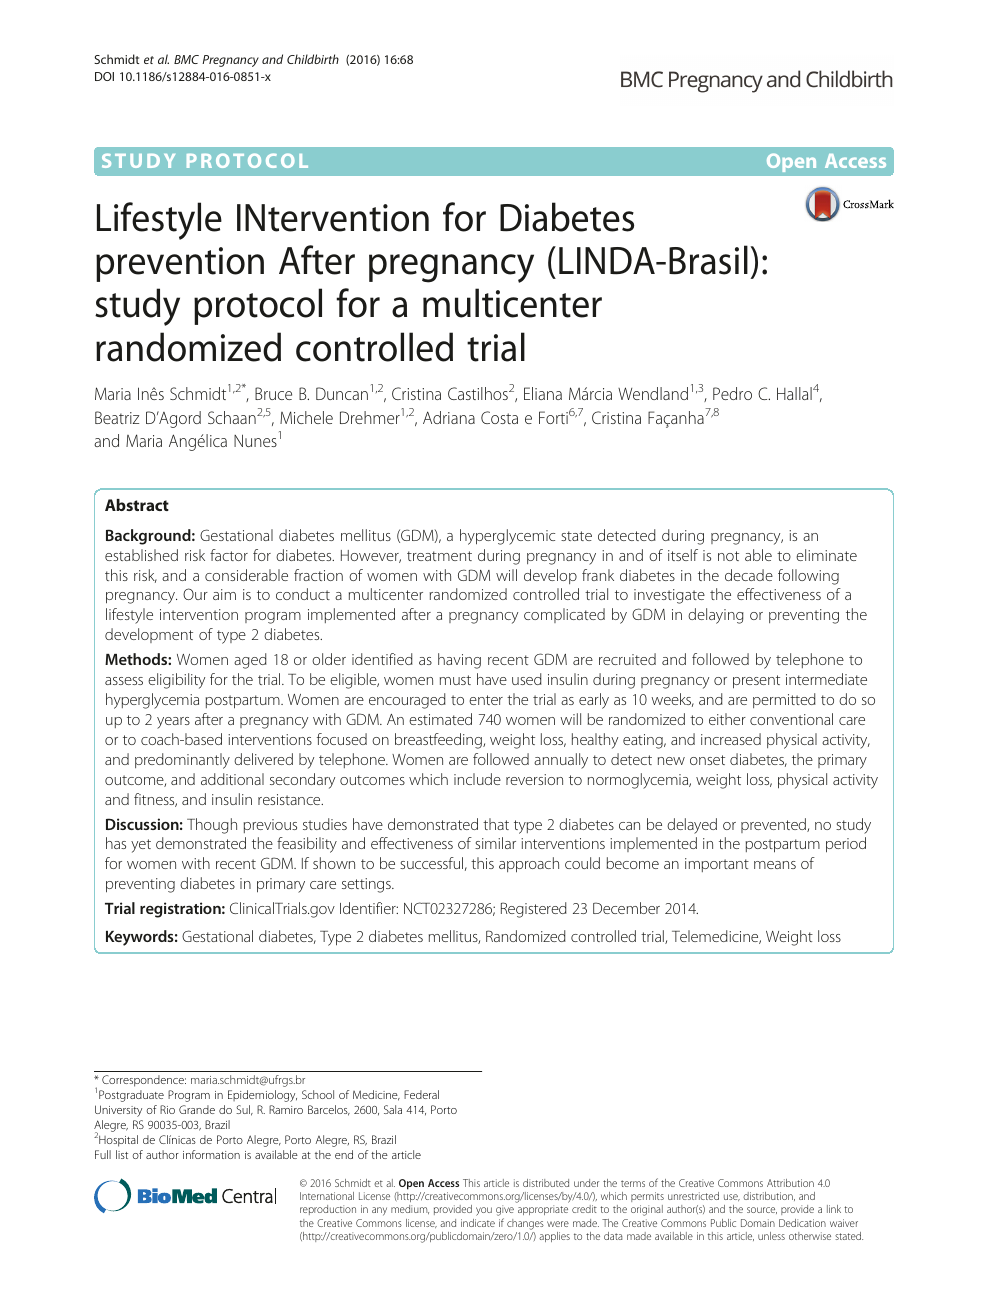 Lifestyle Intervention For Diabetes Prevention After Pregnancy